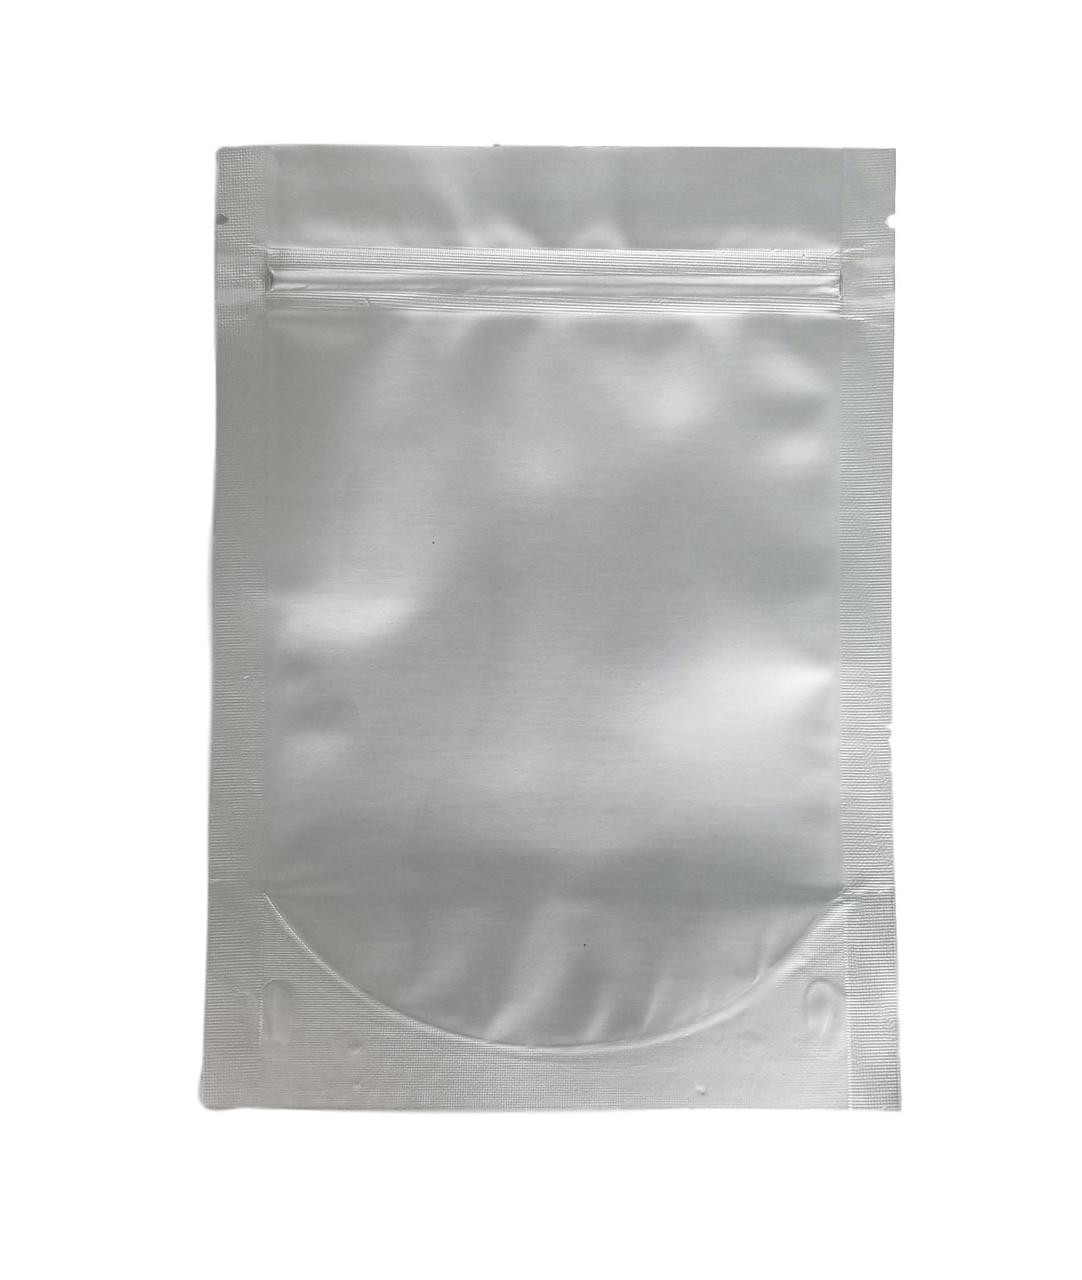 2.5 Gallon 7-MIL Gusseted Zip Lock Mylar Bags.